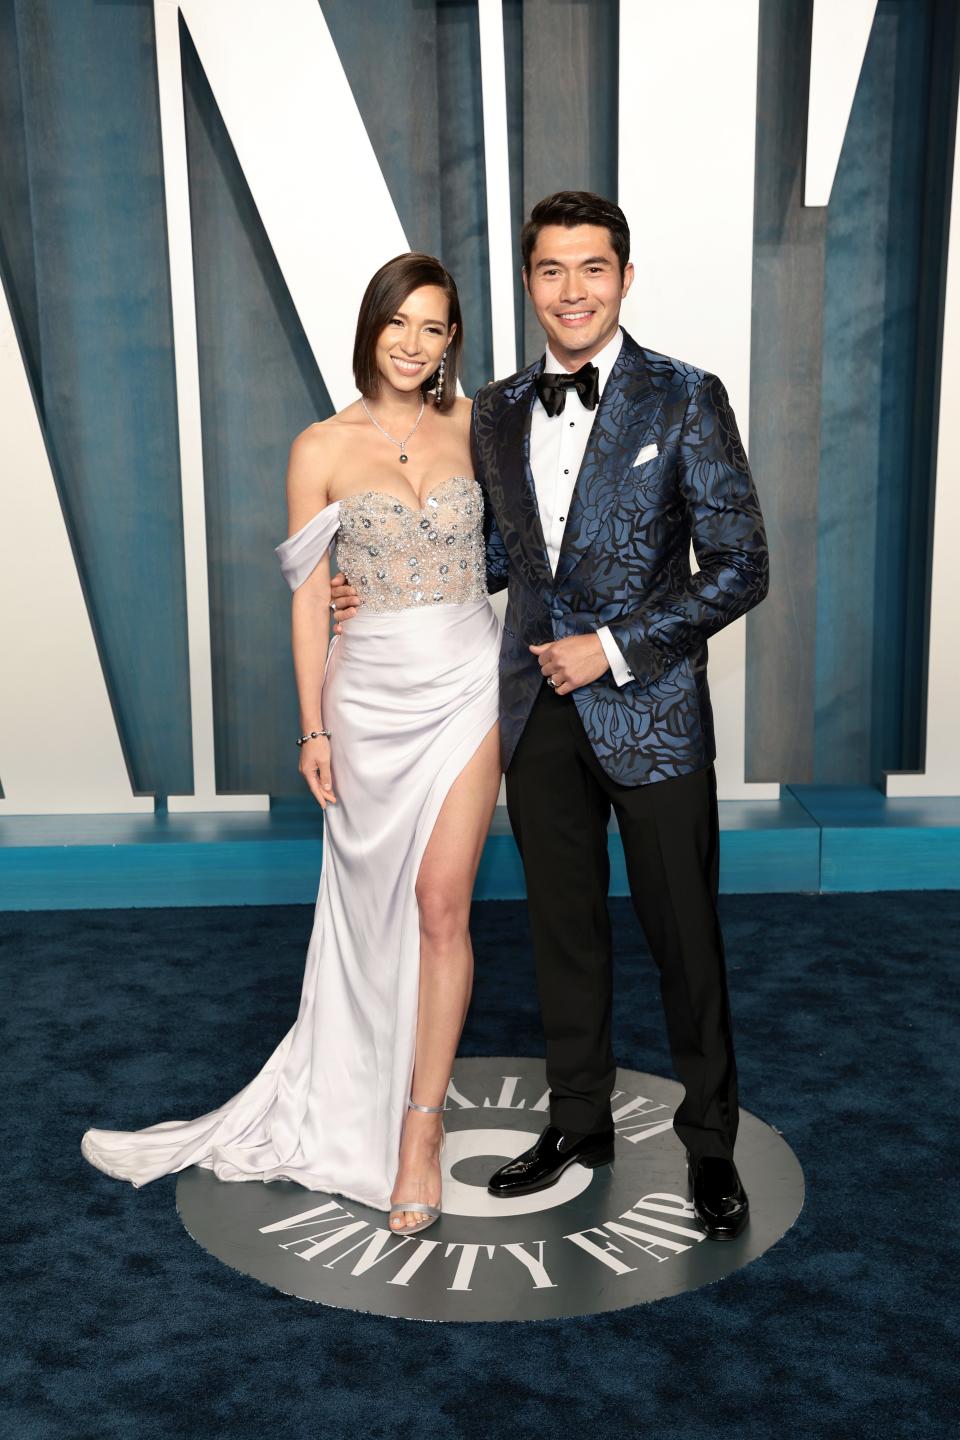 Liv in a pale blue-silver gown. The bodice is sheer showing large sequence and boning. The off the shoulder mini skeeves and thigh-high slit skirt are satin. Henry is in a dark blue shiny brocade blazer with a black bowtie and pants.